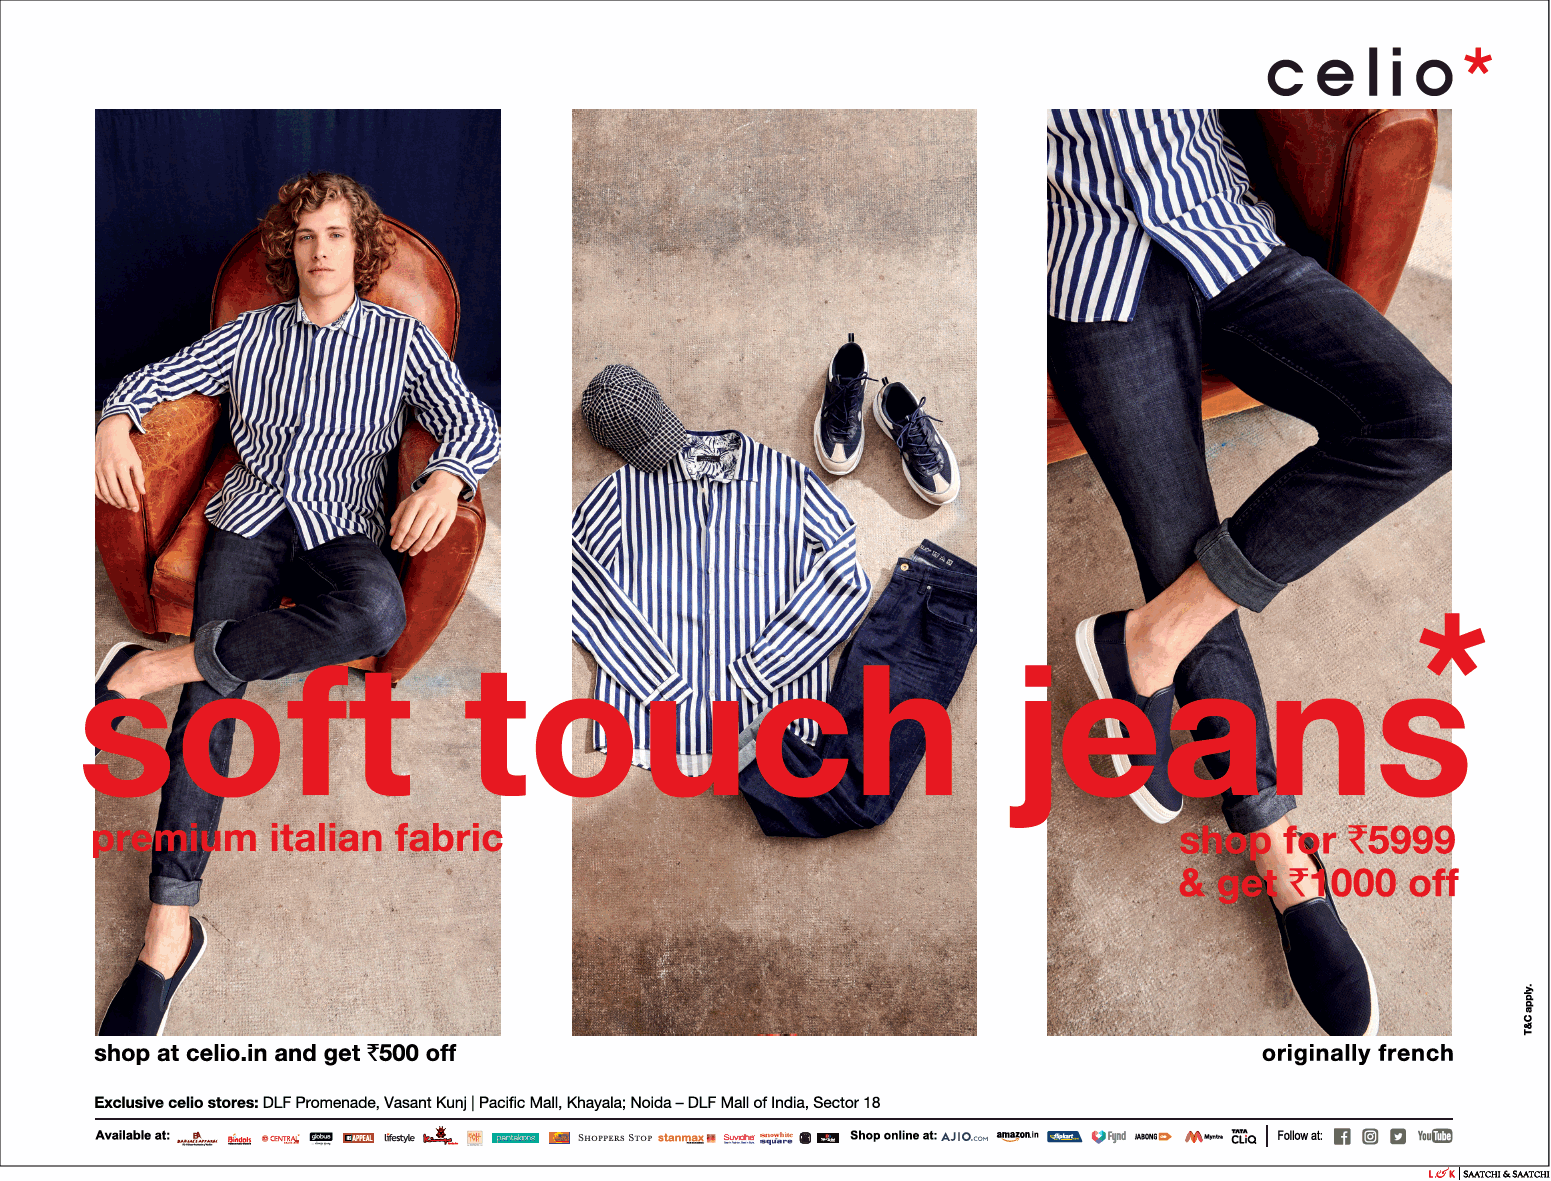 Celio Clothing Soft Touch Jeans Shop For Rs 5999 And Get Rs 1000 Off Ad ...